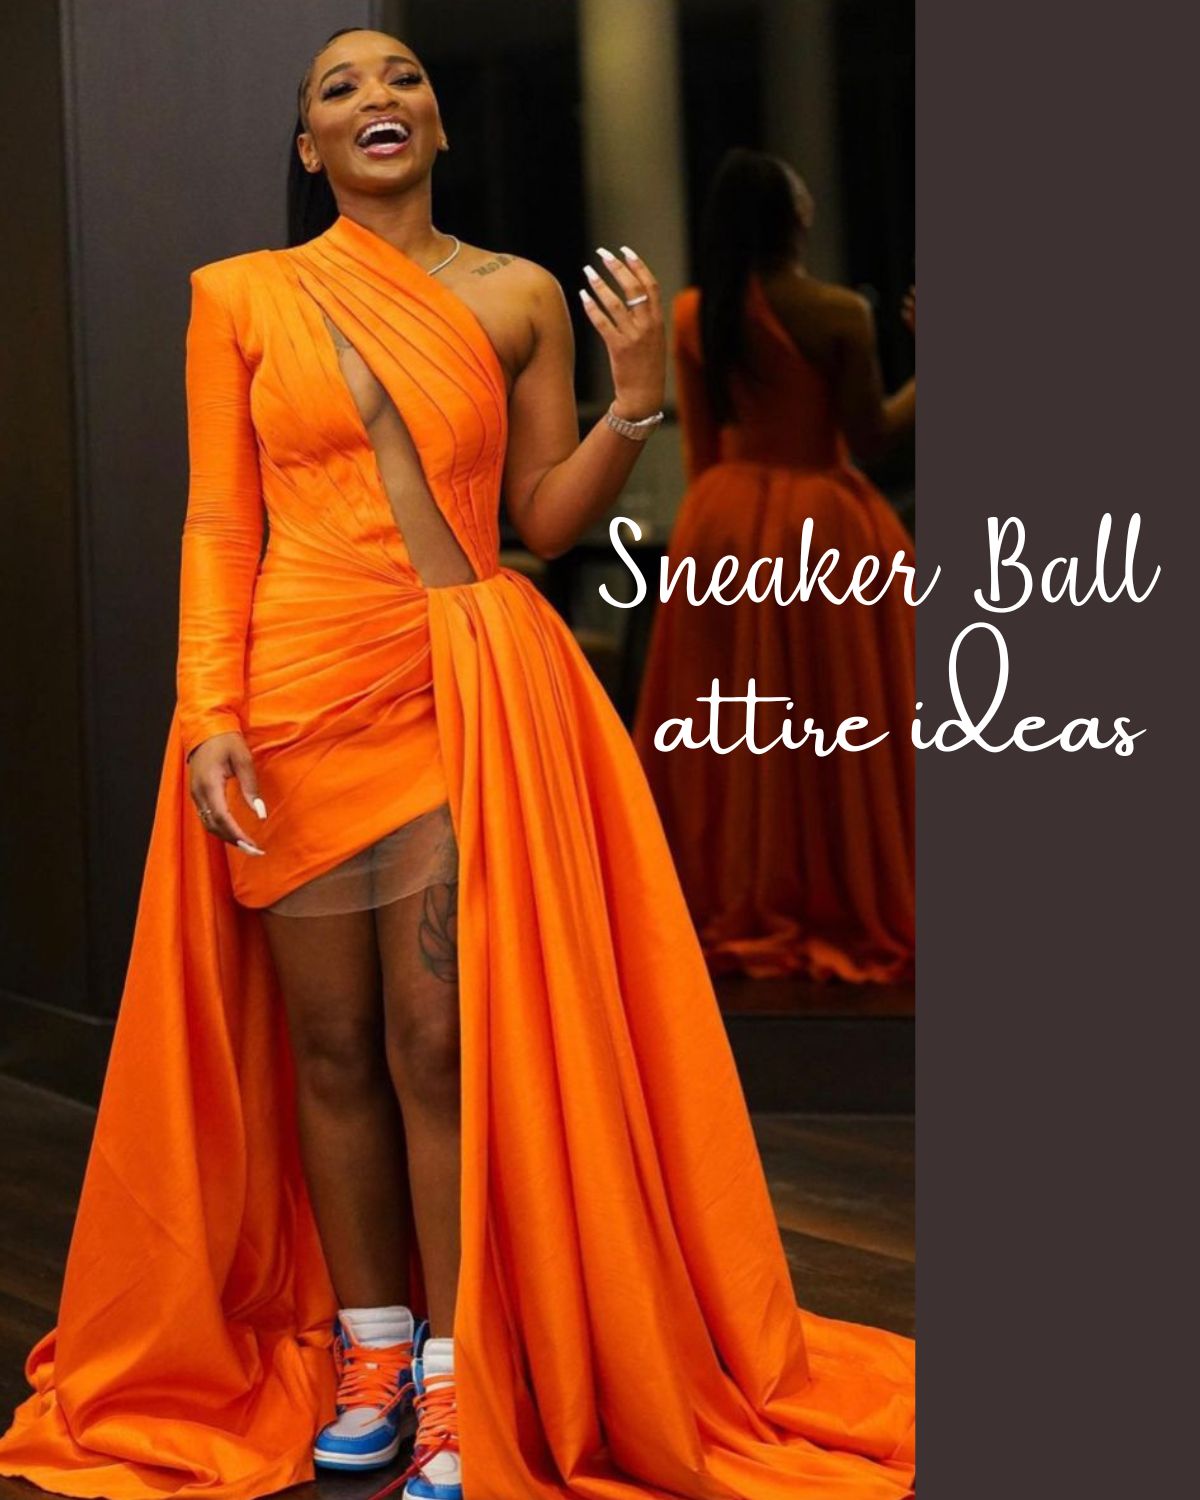 A girl in a bright orange ball gown and Nike hightop sneakers